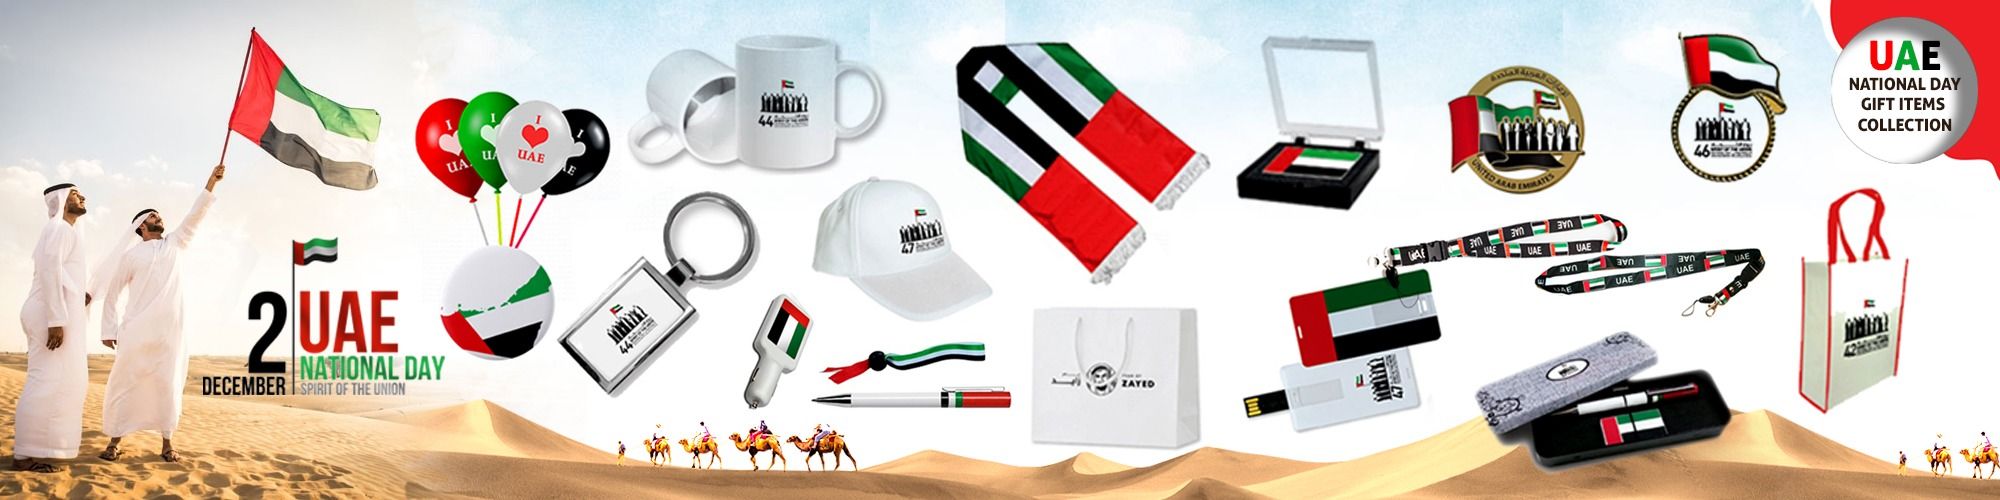 UAE National Day Products